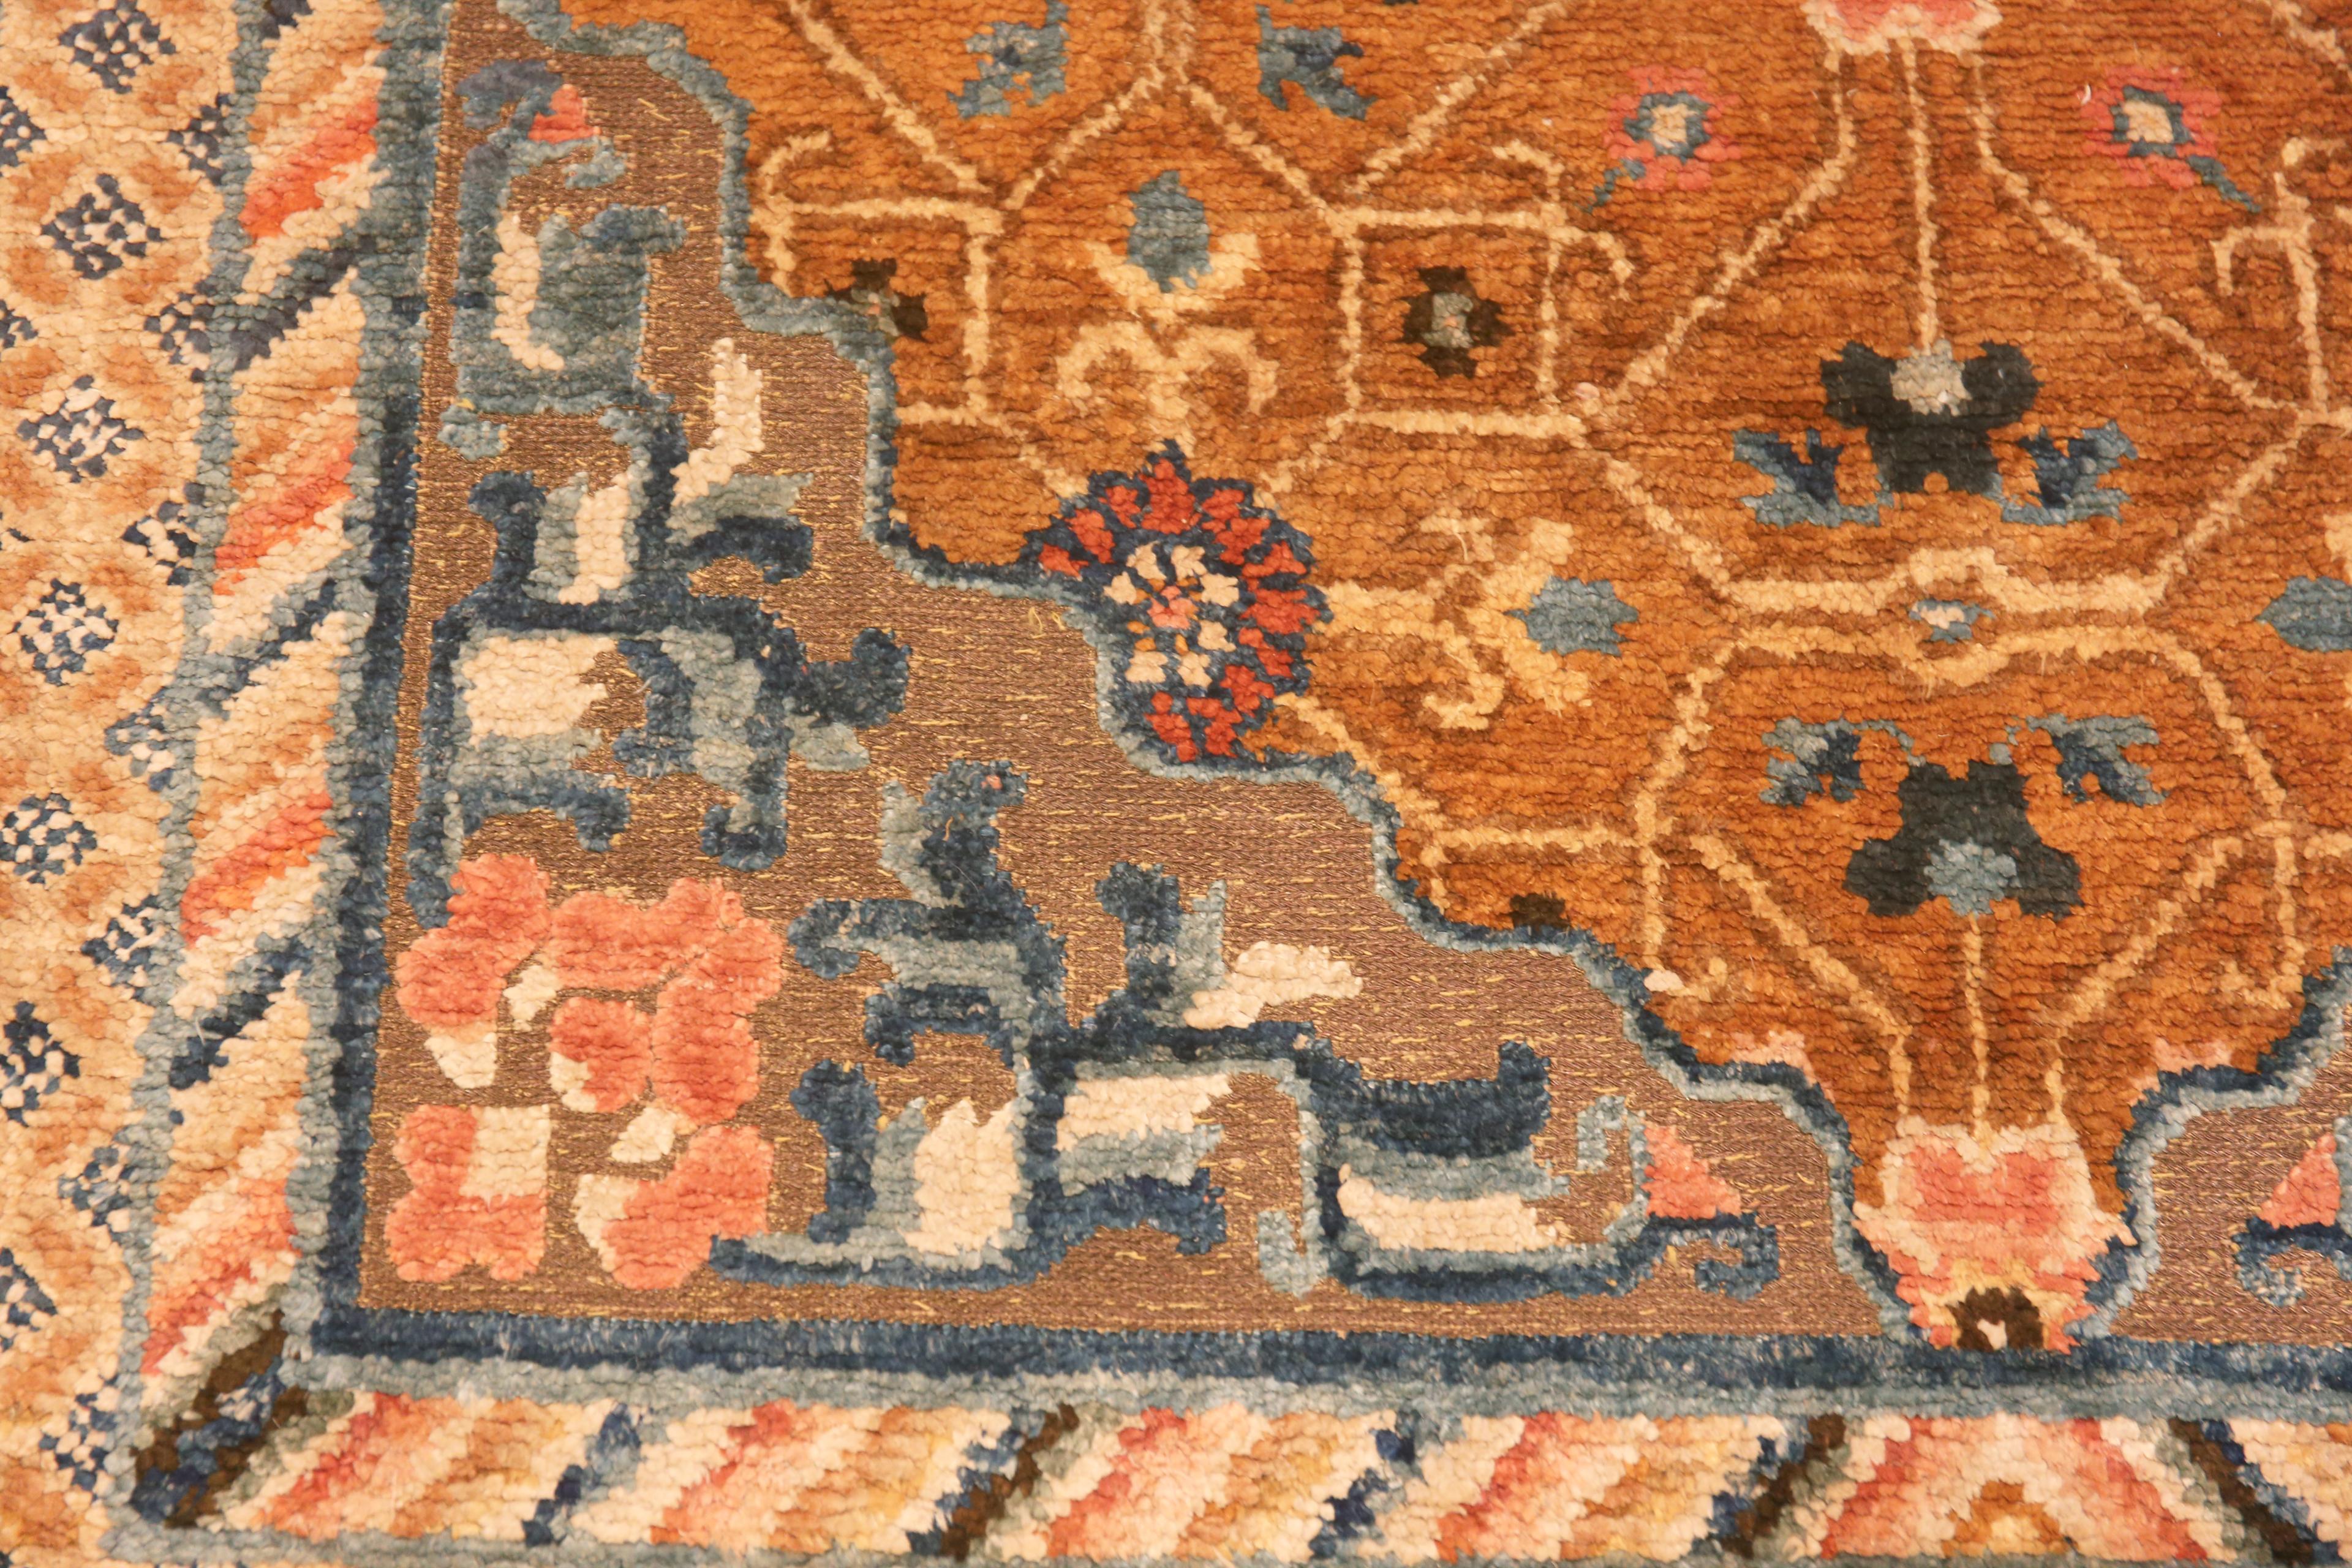 Collectible Antique Mid 19th Century Chinese Metallic and Silk Pile Rug 4' x 7' For Sale 5